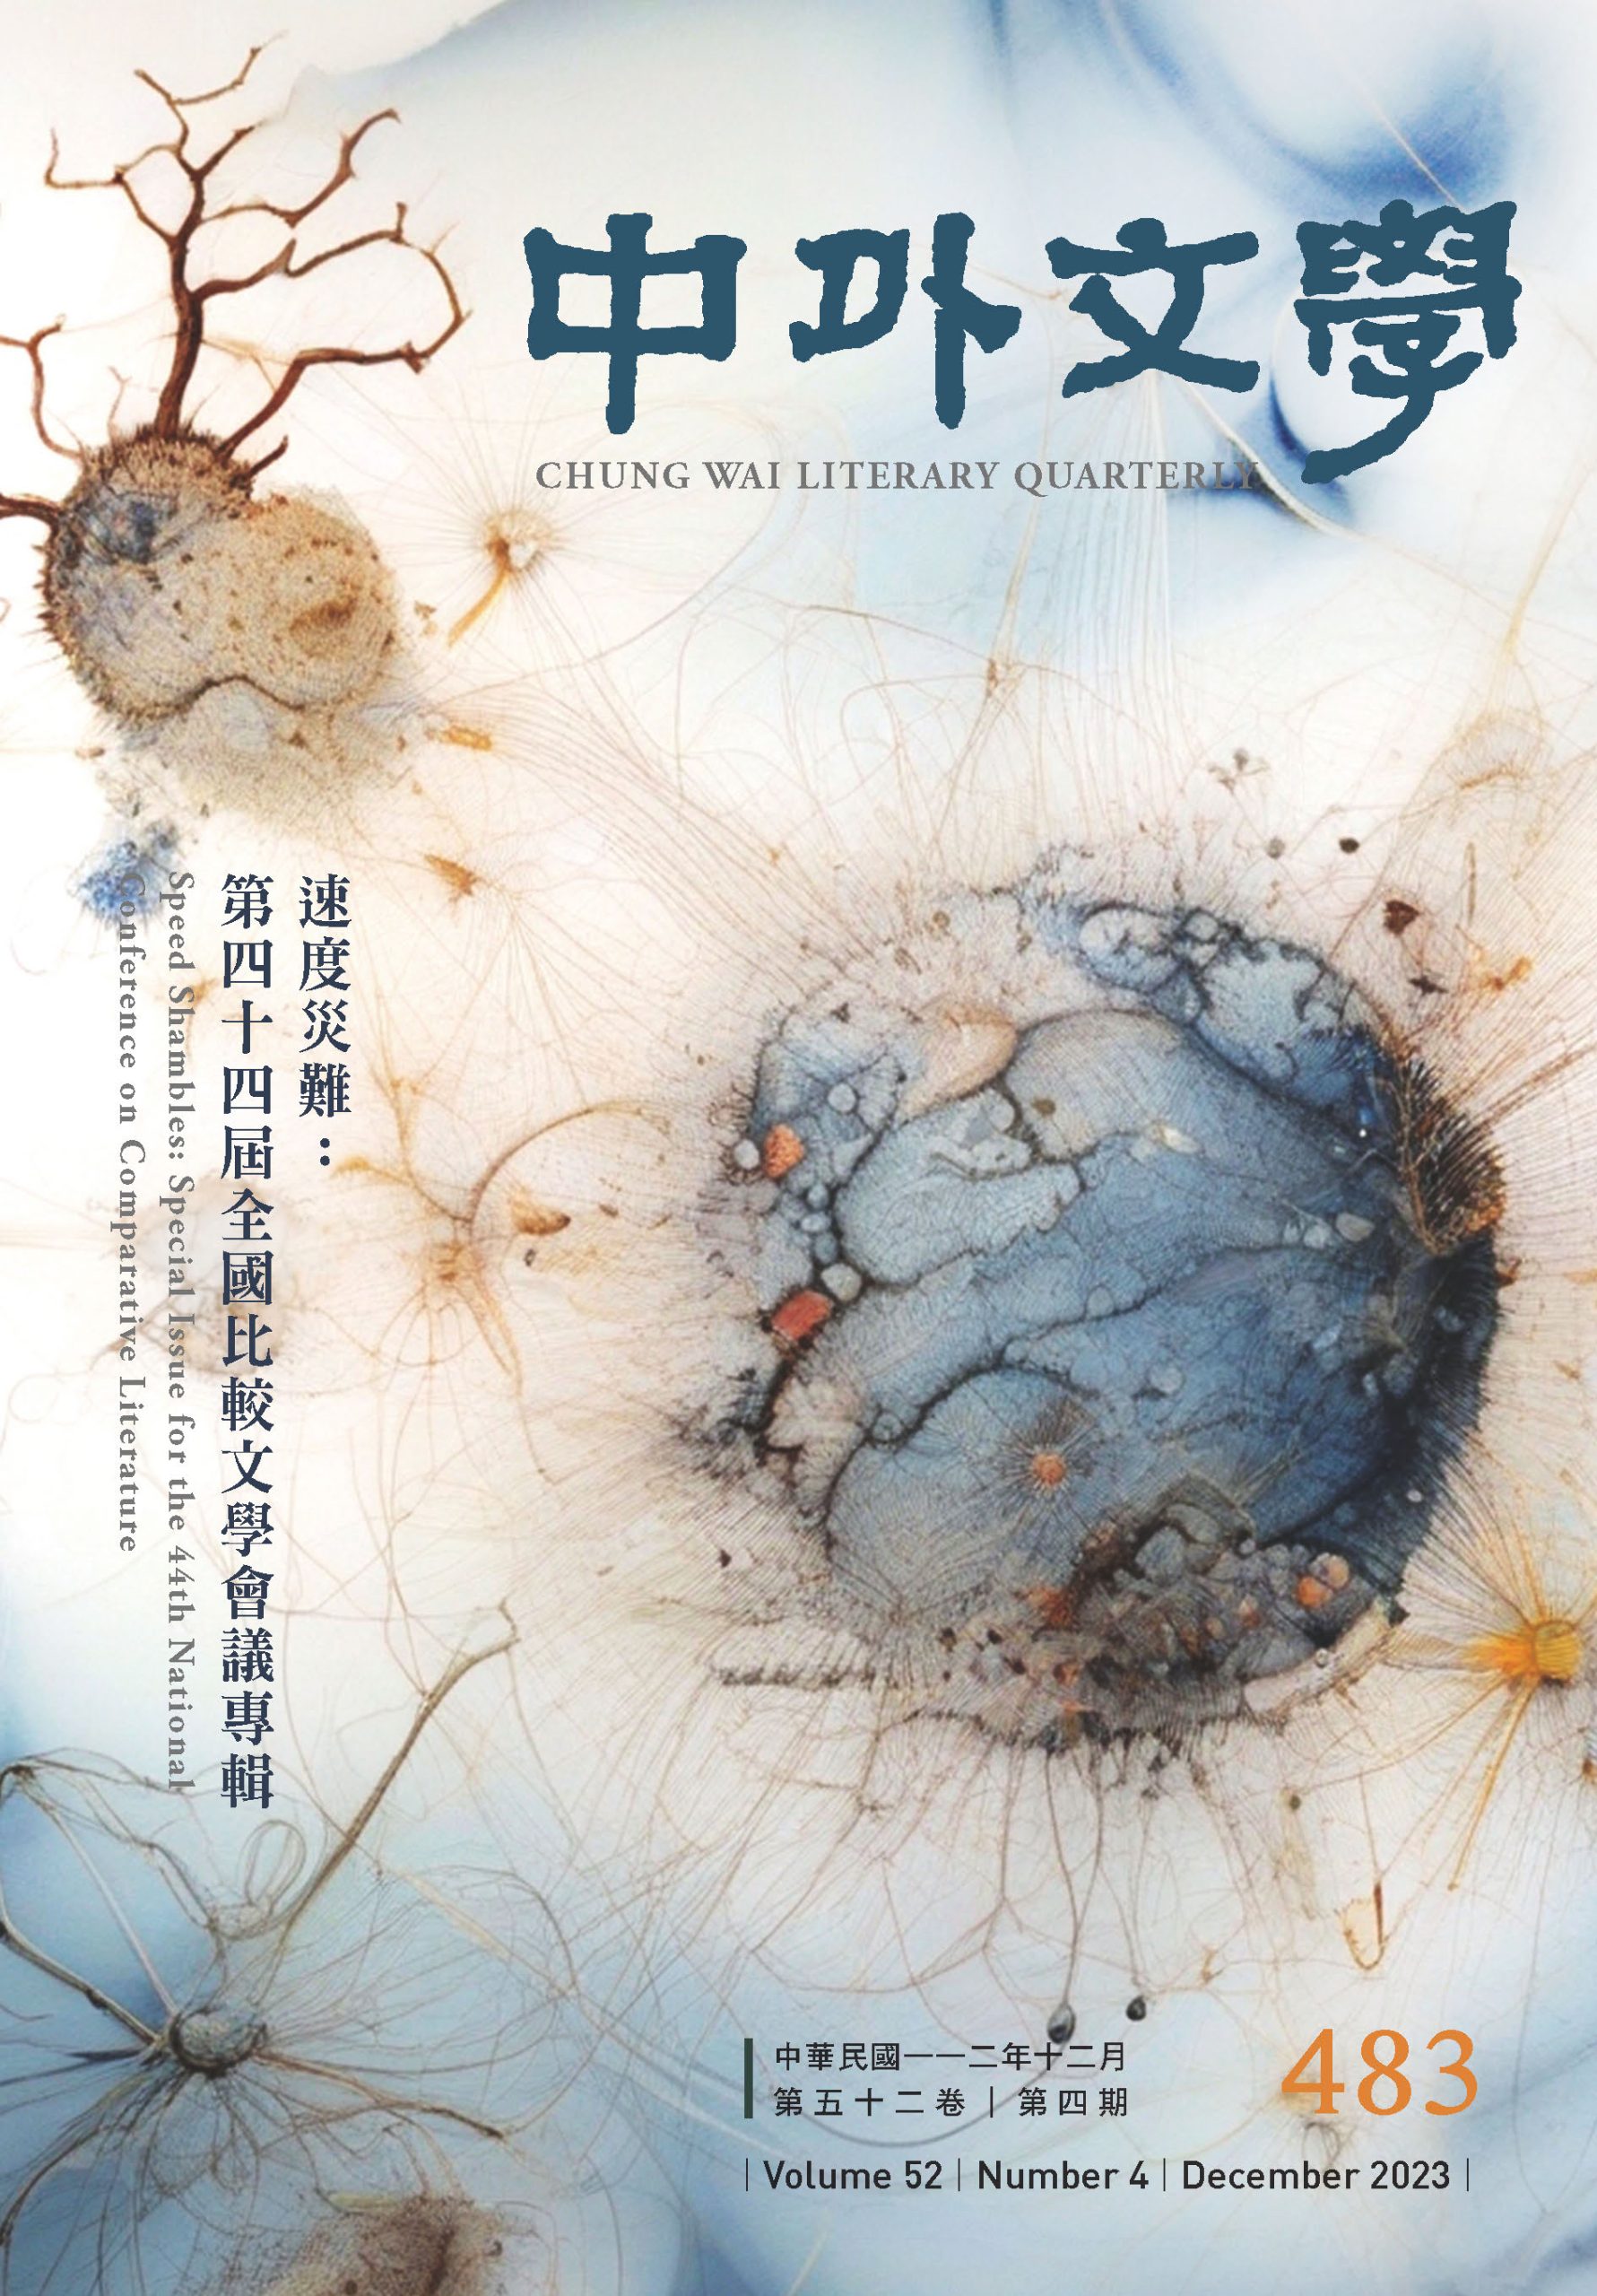 The December issue of Chung Wai Literary Quarterly--Speed Shambles: Special Issue for the 44th National Conference on Comparative Literature--has been released.